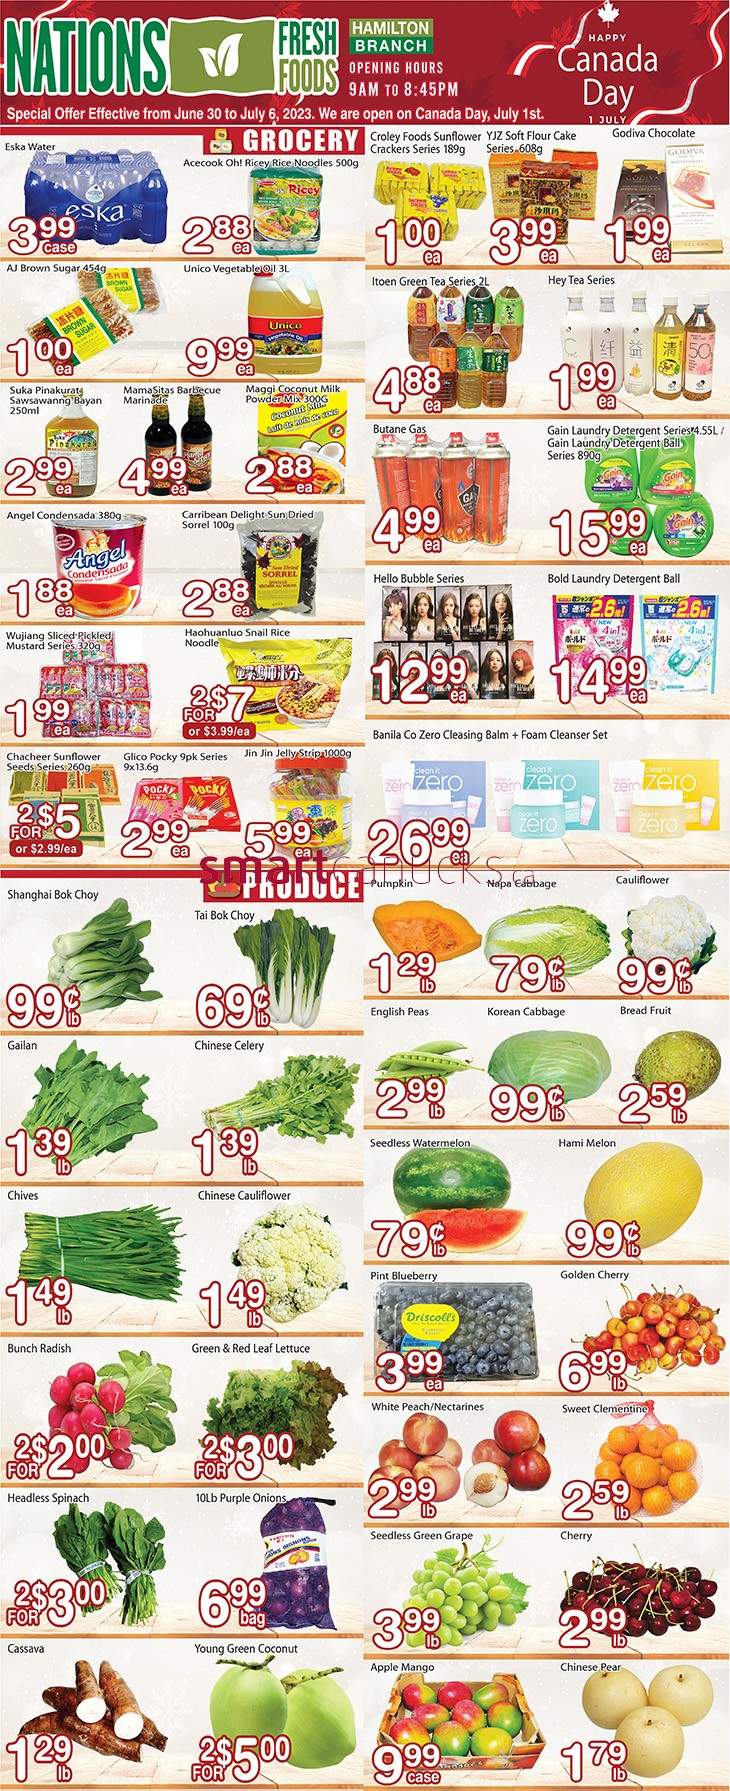 Nations Fresh Foods (Hamilton) Flyer June 30 to July 6